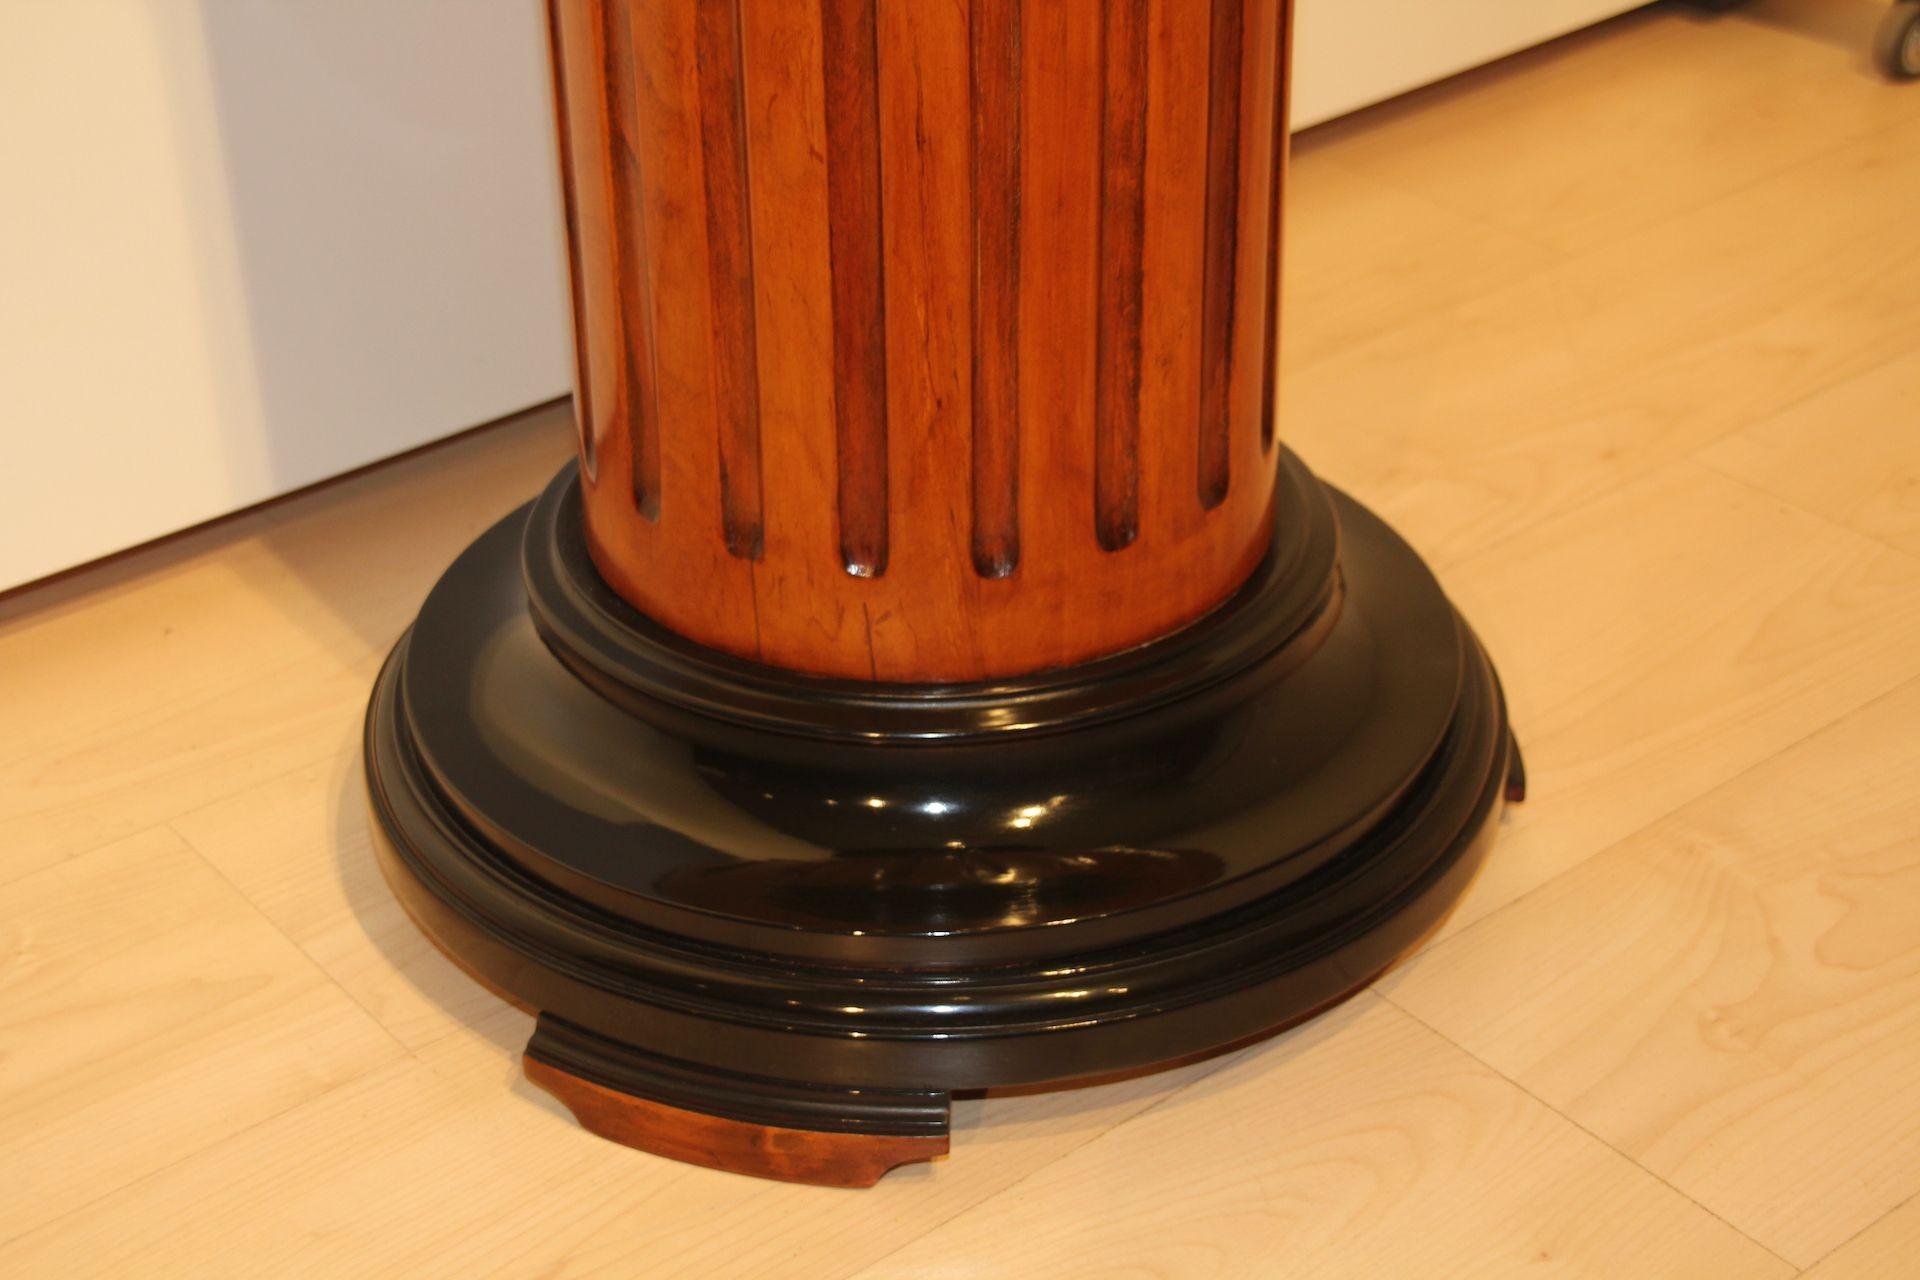 Neoclassical Rotating Pedestal, Beech Wood, French Polished, Germany, Circa 1920 For Sale 3